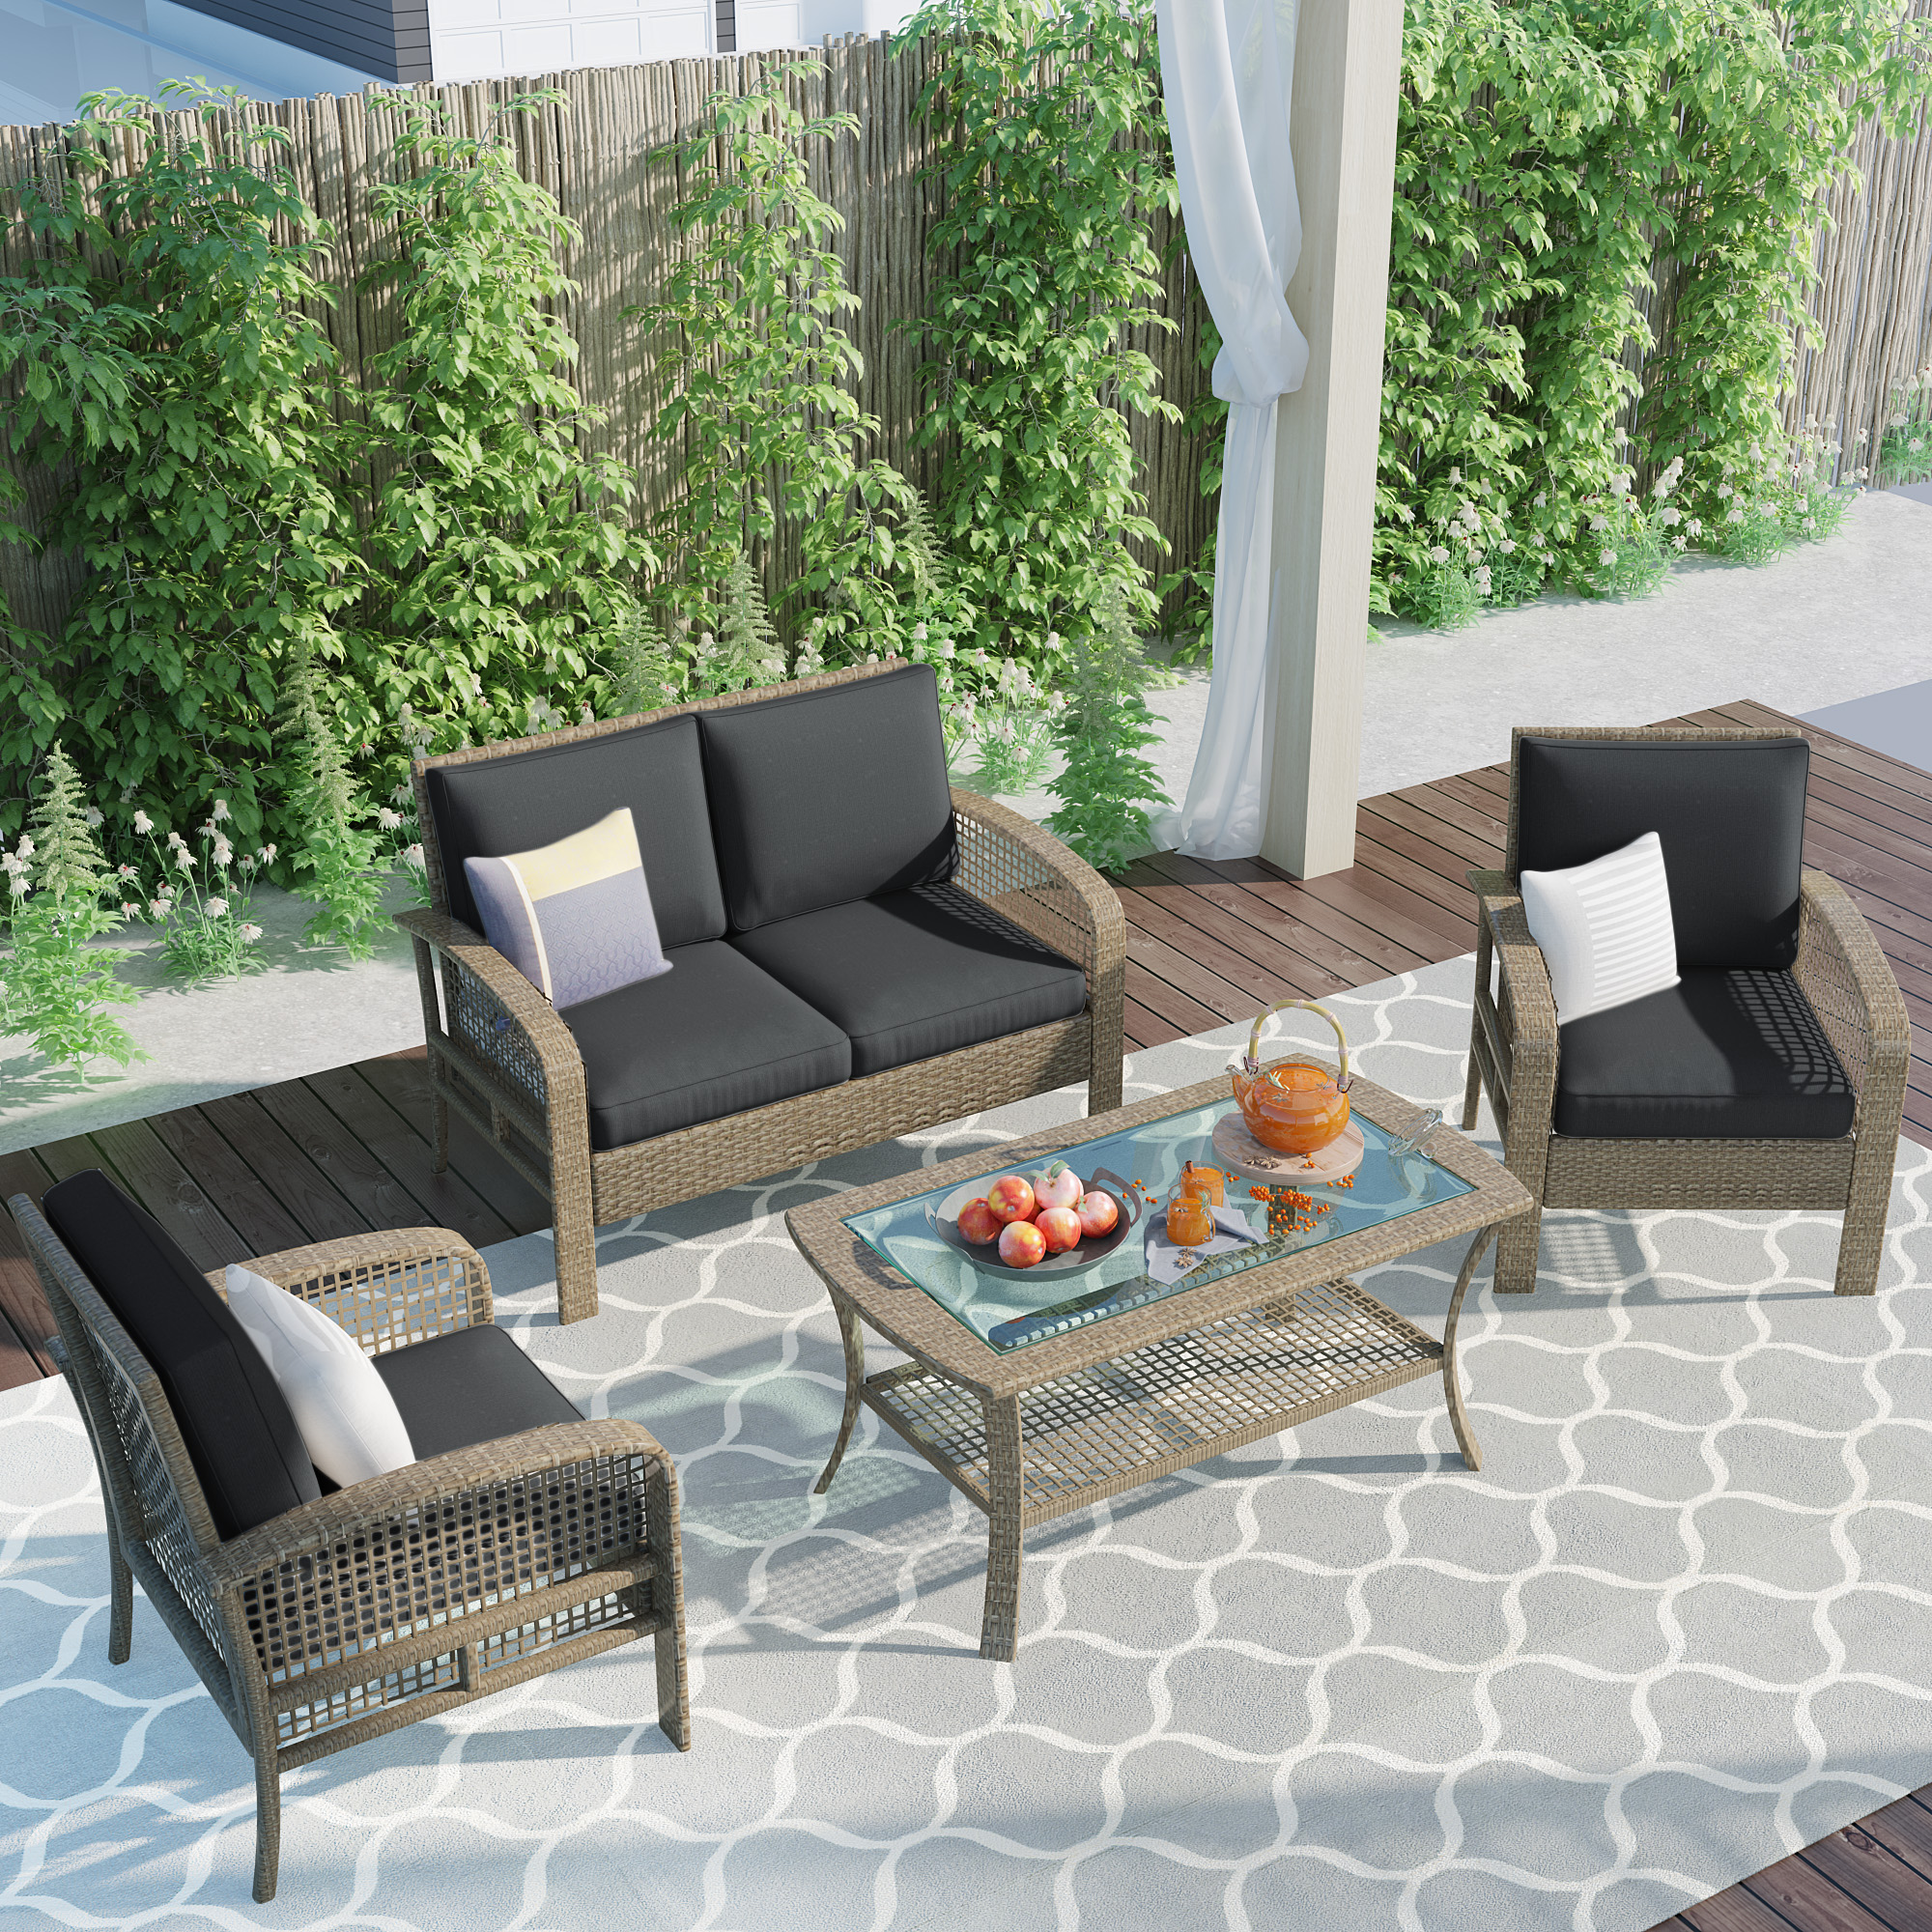 4 Pcs Patio Conversation Sets, PE Rattan Patio Set, Outdoor Bistro Set with Table and Washable Cushions, Patio Porch Sunroom Furniture Set for Garden Poolside Balcony, JA2370 - image 1 of 8